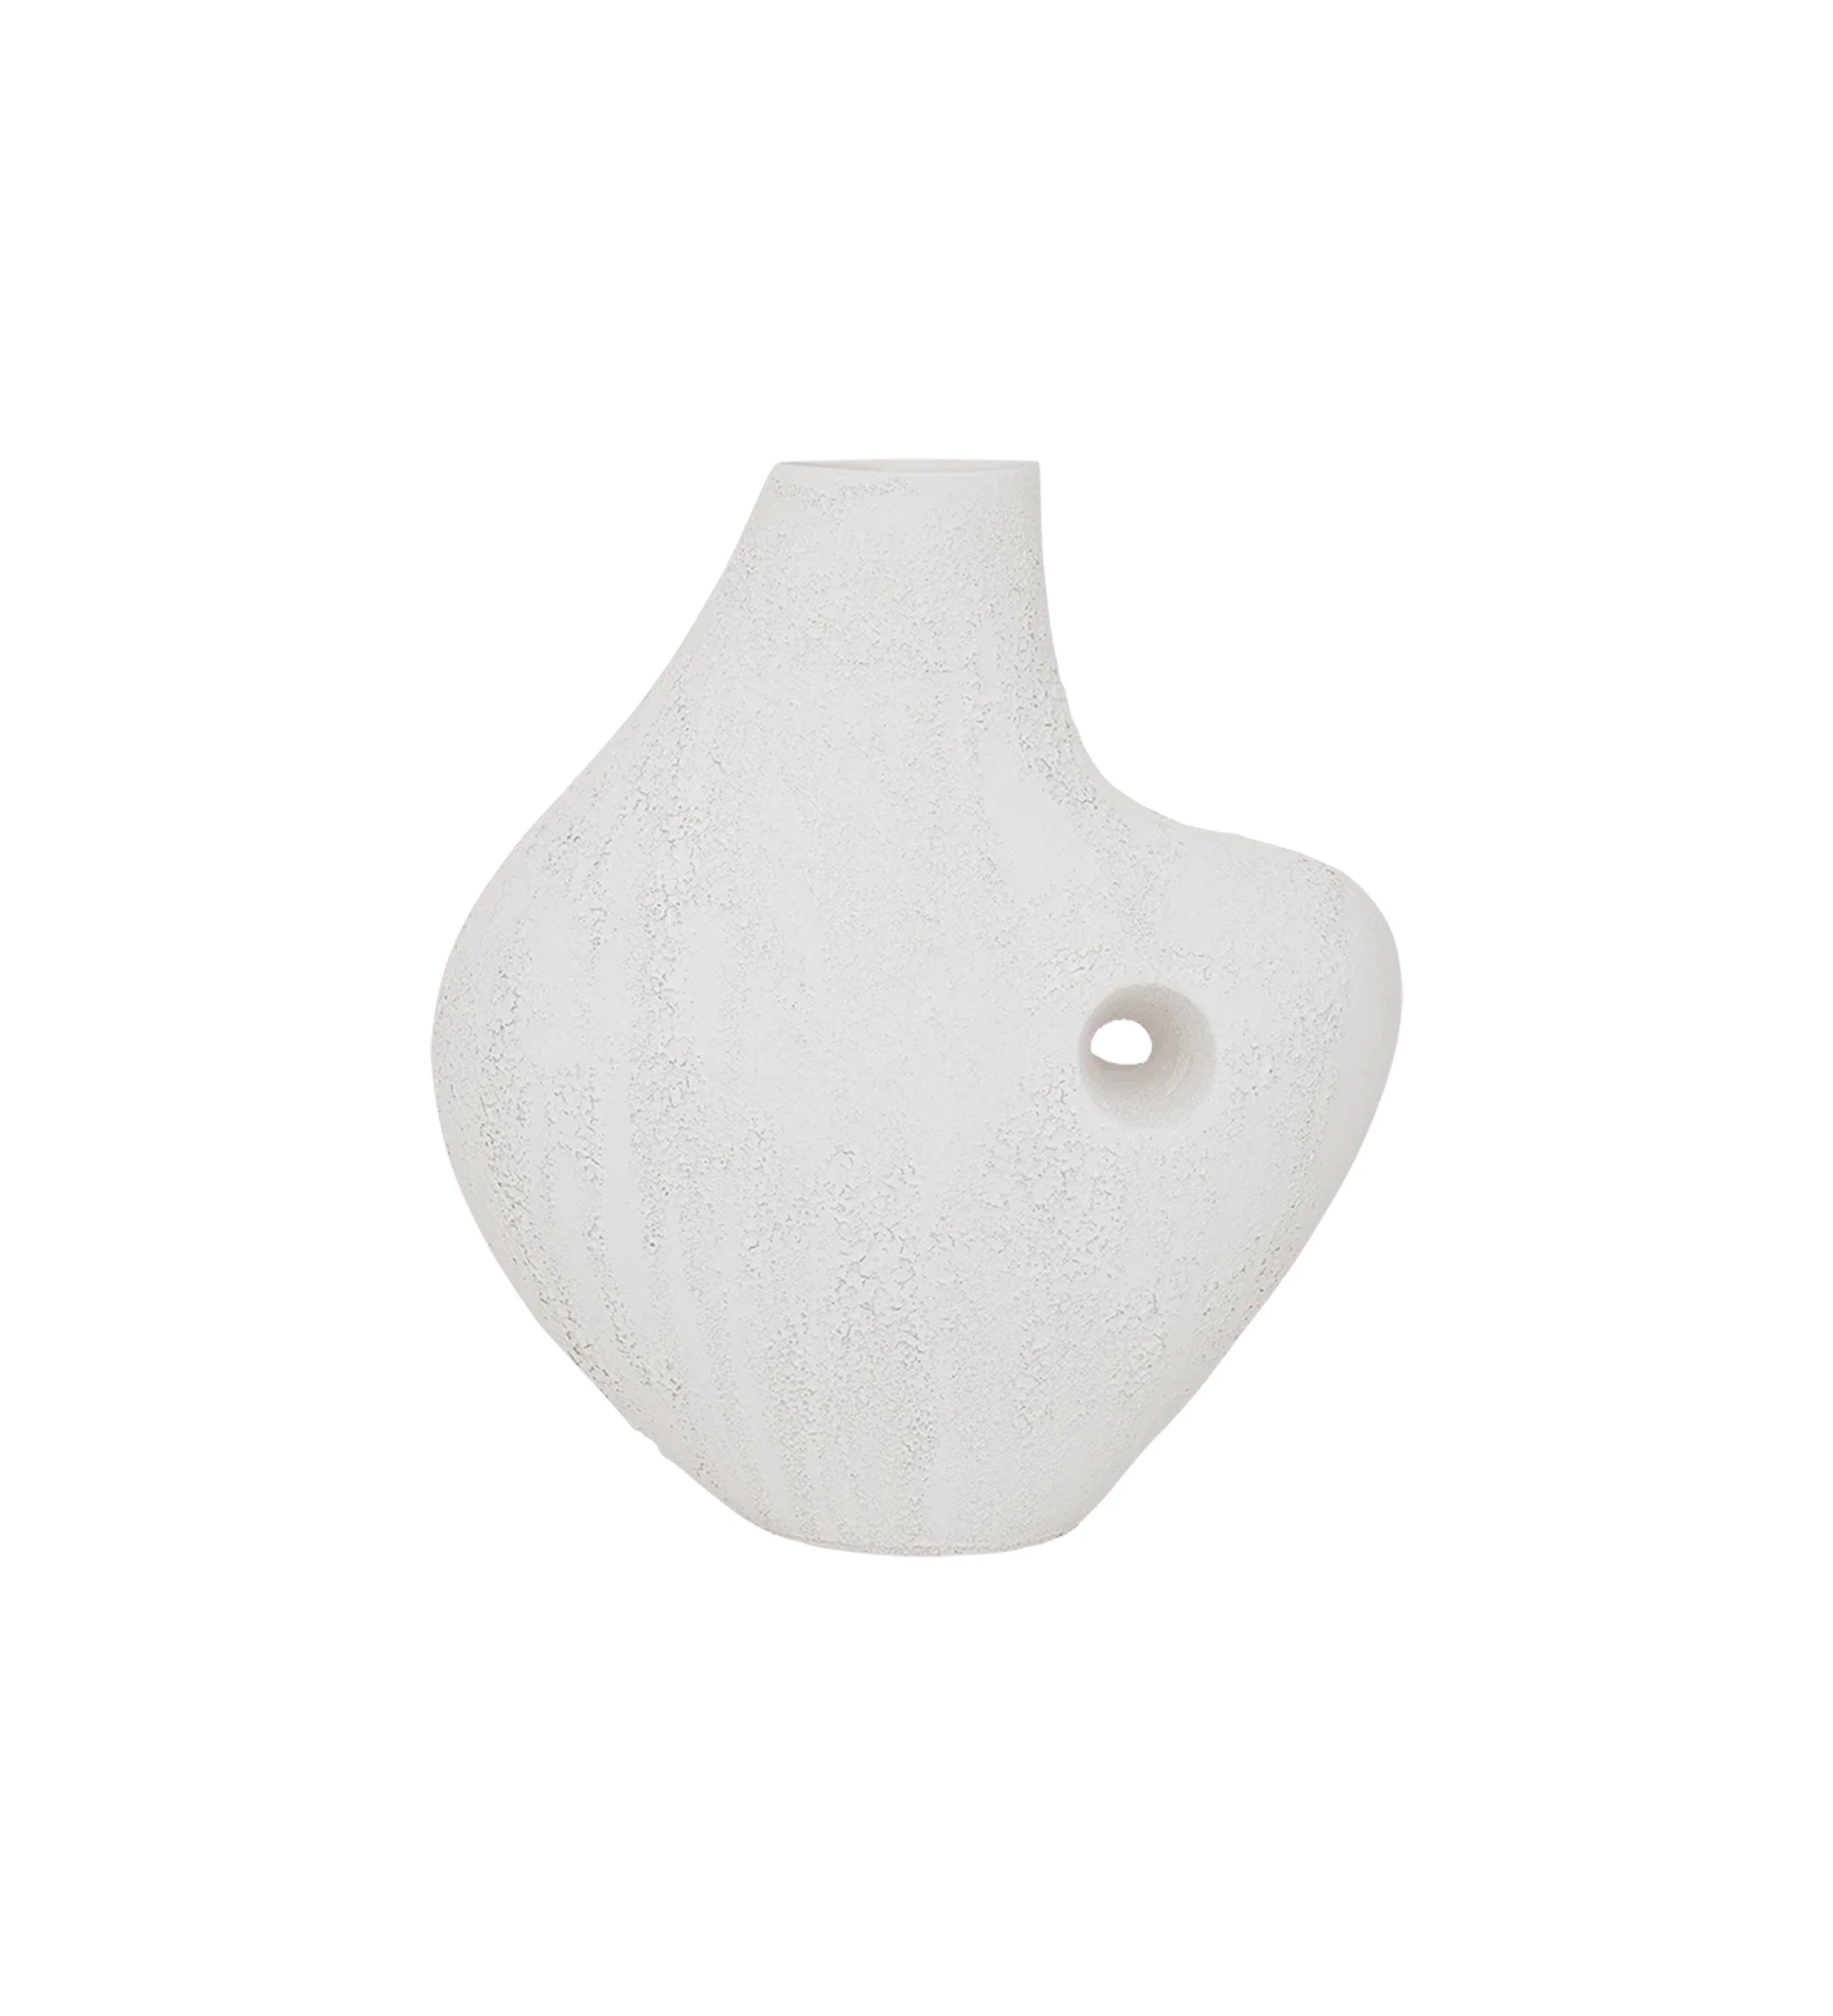 Handmade vase with handmade ceramic structure in pearl color and with sandy texture.